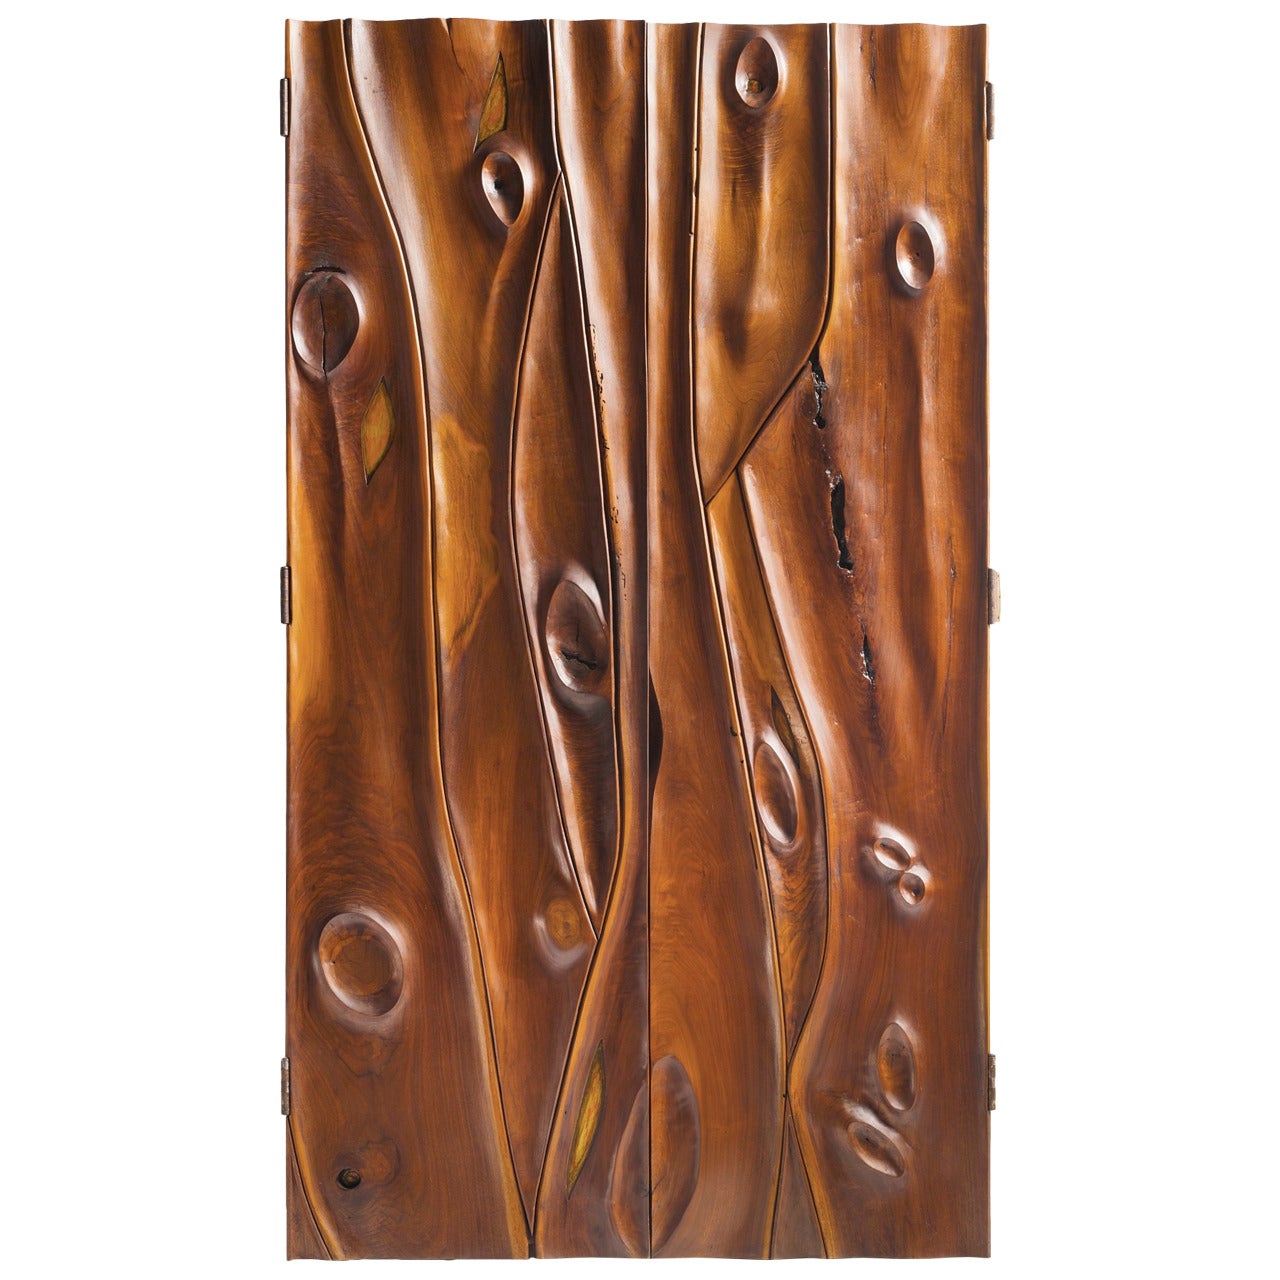 Pair of Carved Wood Doors by Phillip Powell